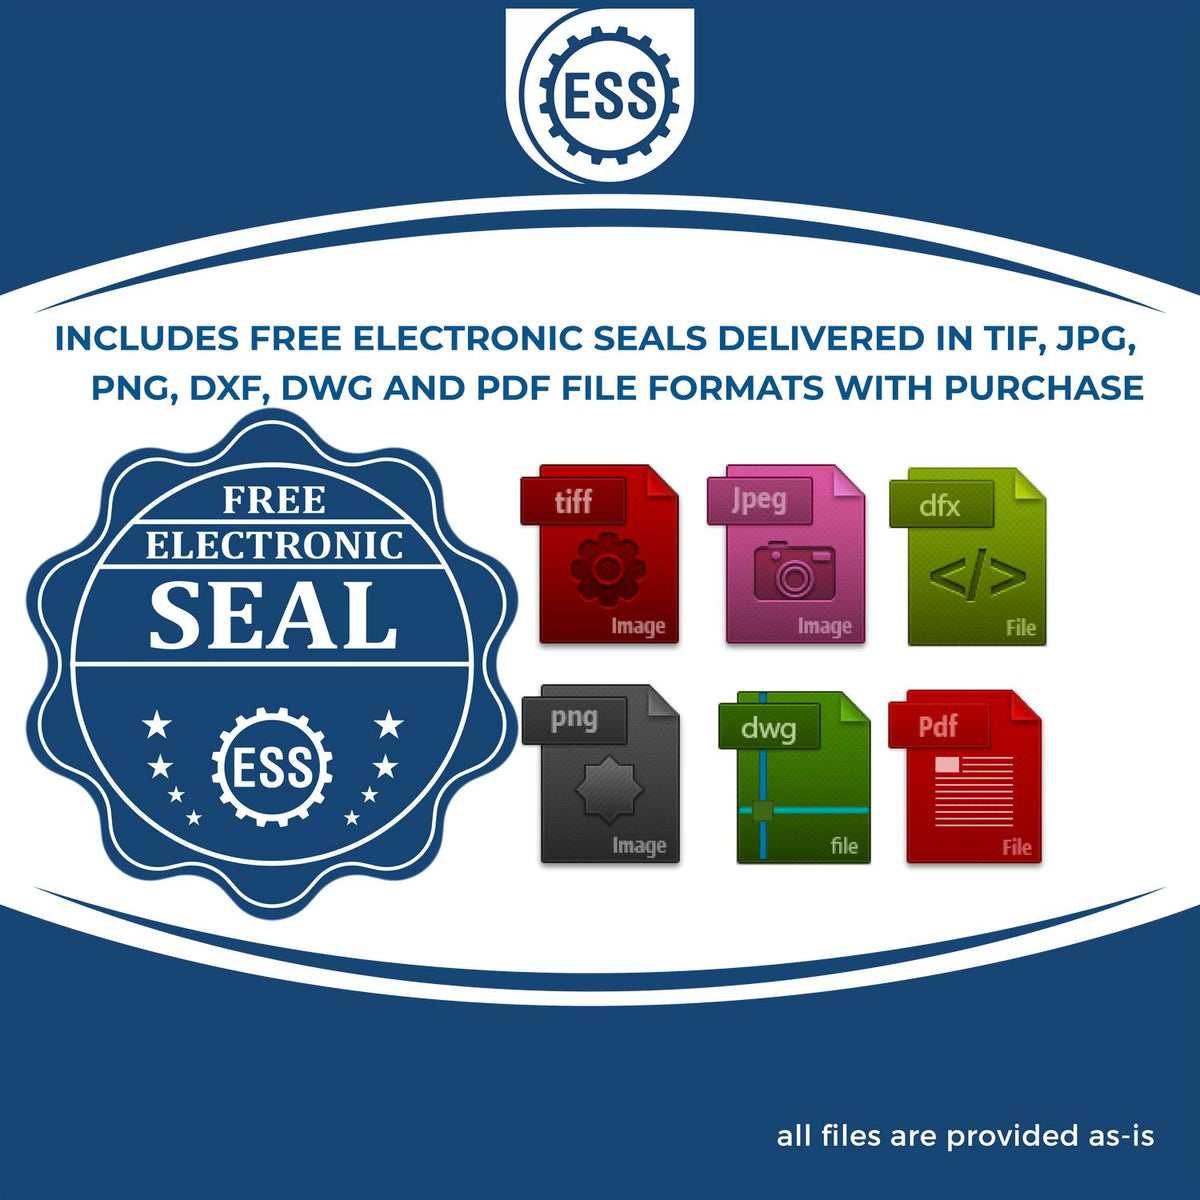 An infographic for the free electronic seal for the Self-Inking Missouri Landscape Architect Stamp illustrating the different file type icons such as DXF, DWG, TIF, JPG and PNG.